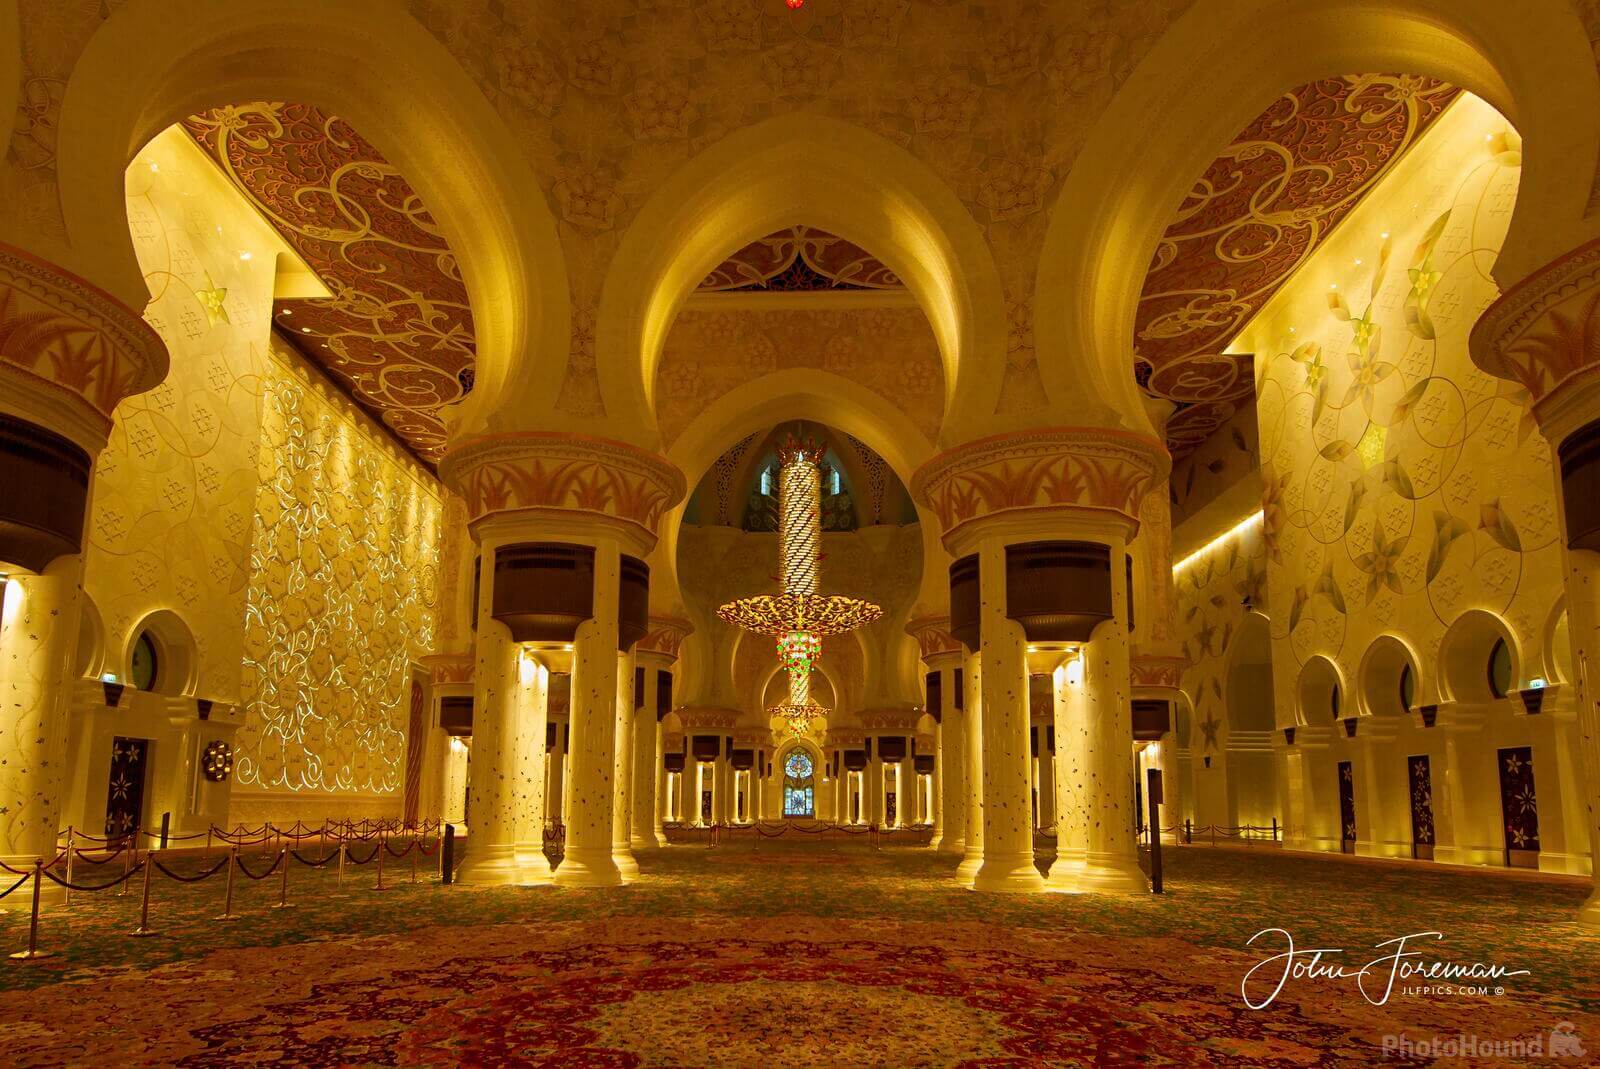 Image of Sheikh Zayed Grand Mosque Center by John Foreman